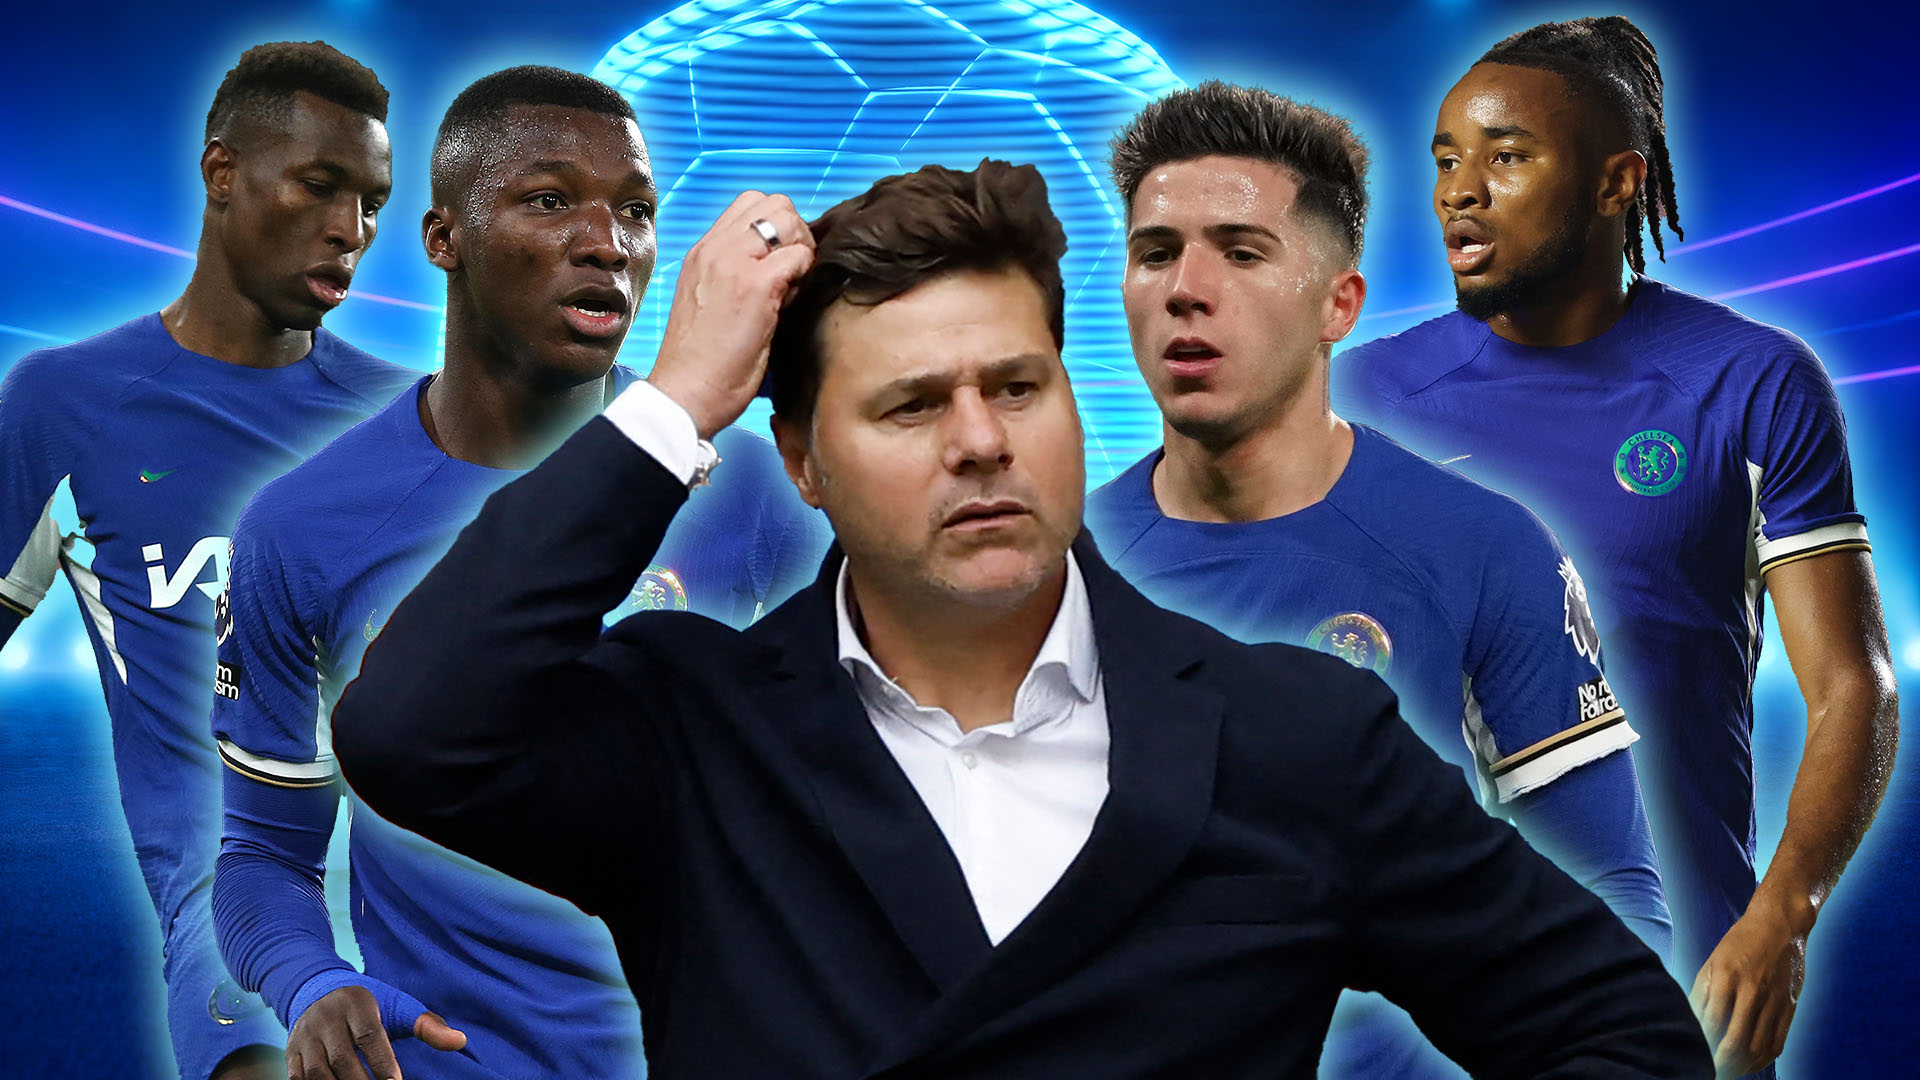 Chelsea need to sign these three stars in January, according to transfer supercomputer - including £100m teenage striker